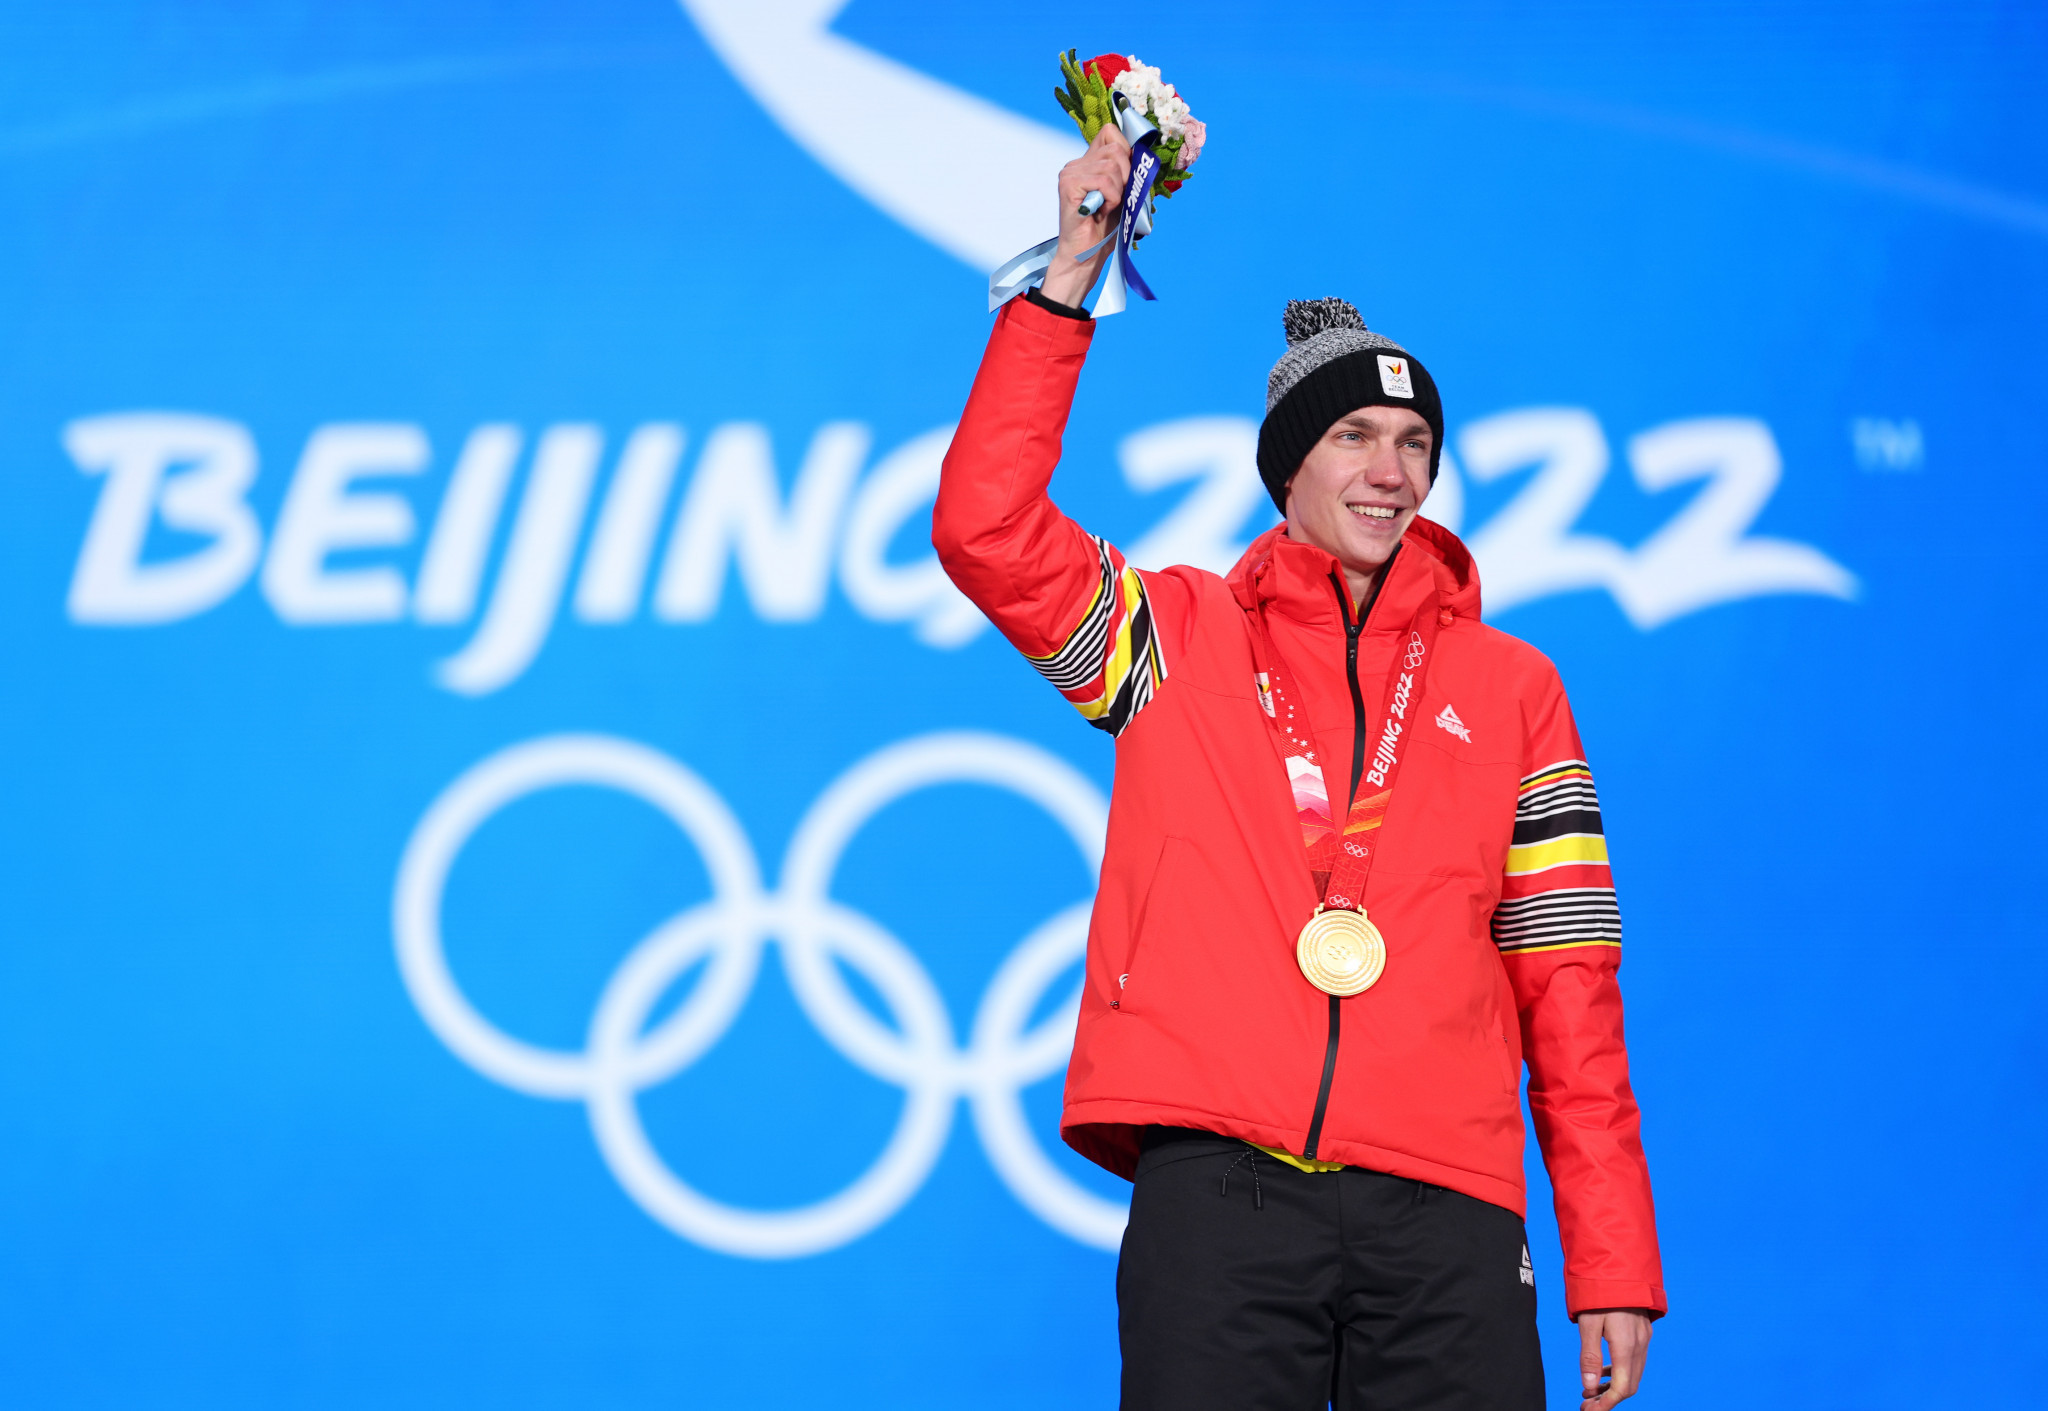 Belgium's speed skater Bart Swings could win World Games gold to go with his Olympic gold medal from Beijing 2022  ©Getty Images